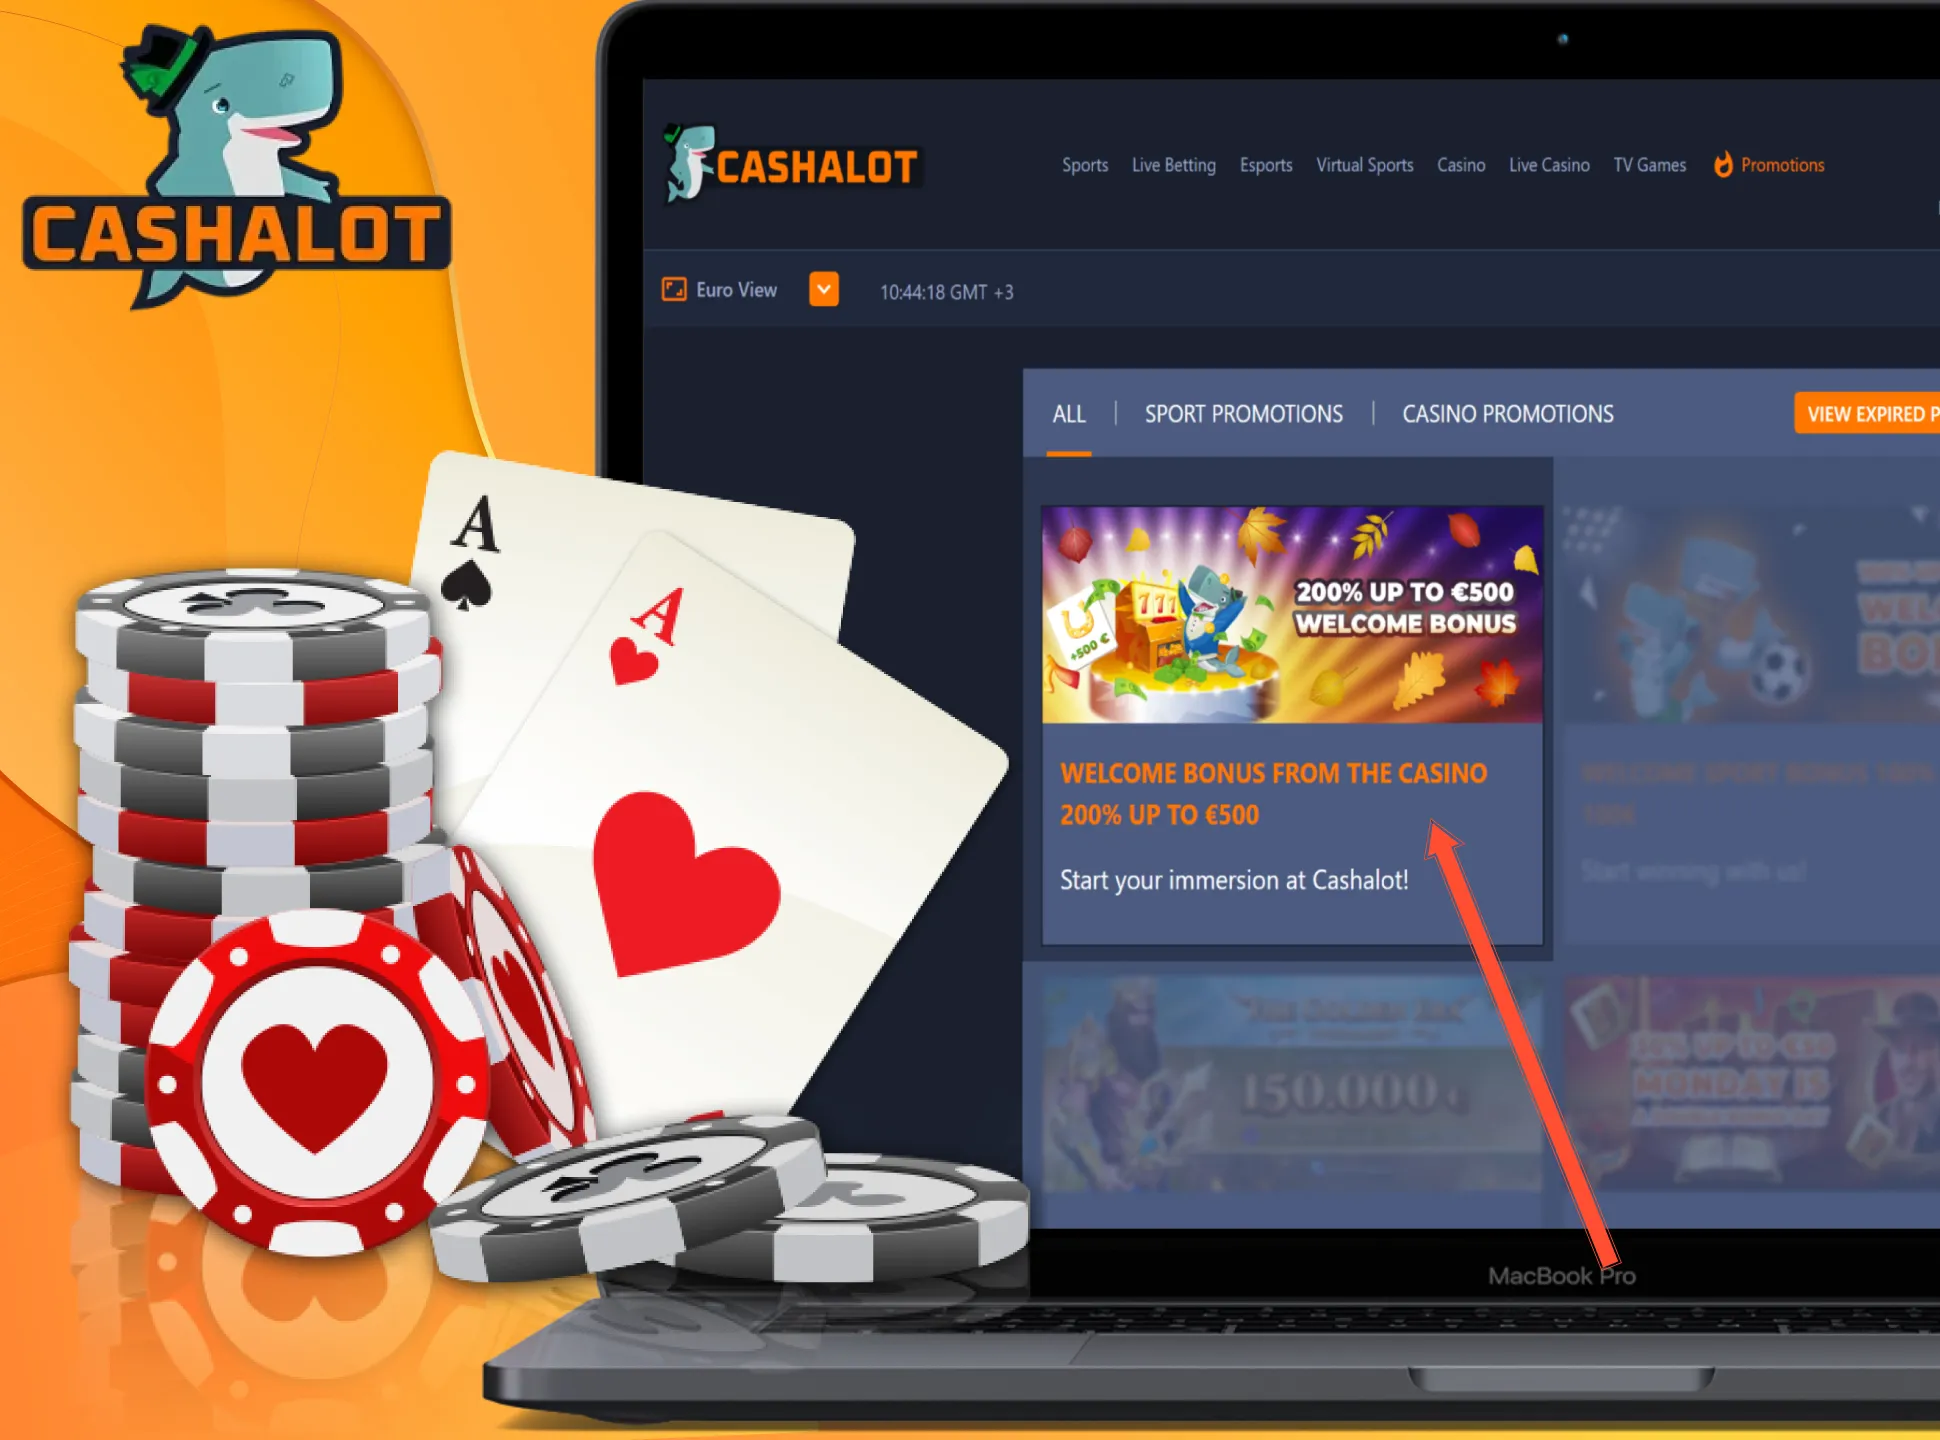 Get your casino welcome bonus by playing the Cashalot casino games.